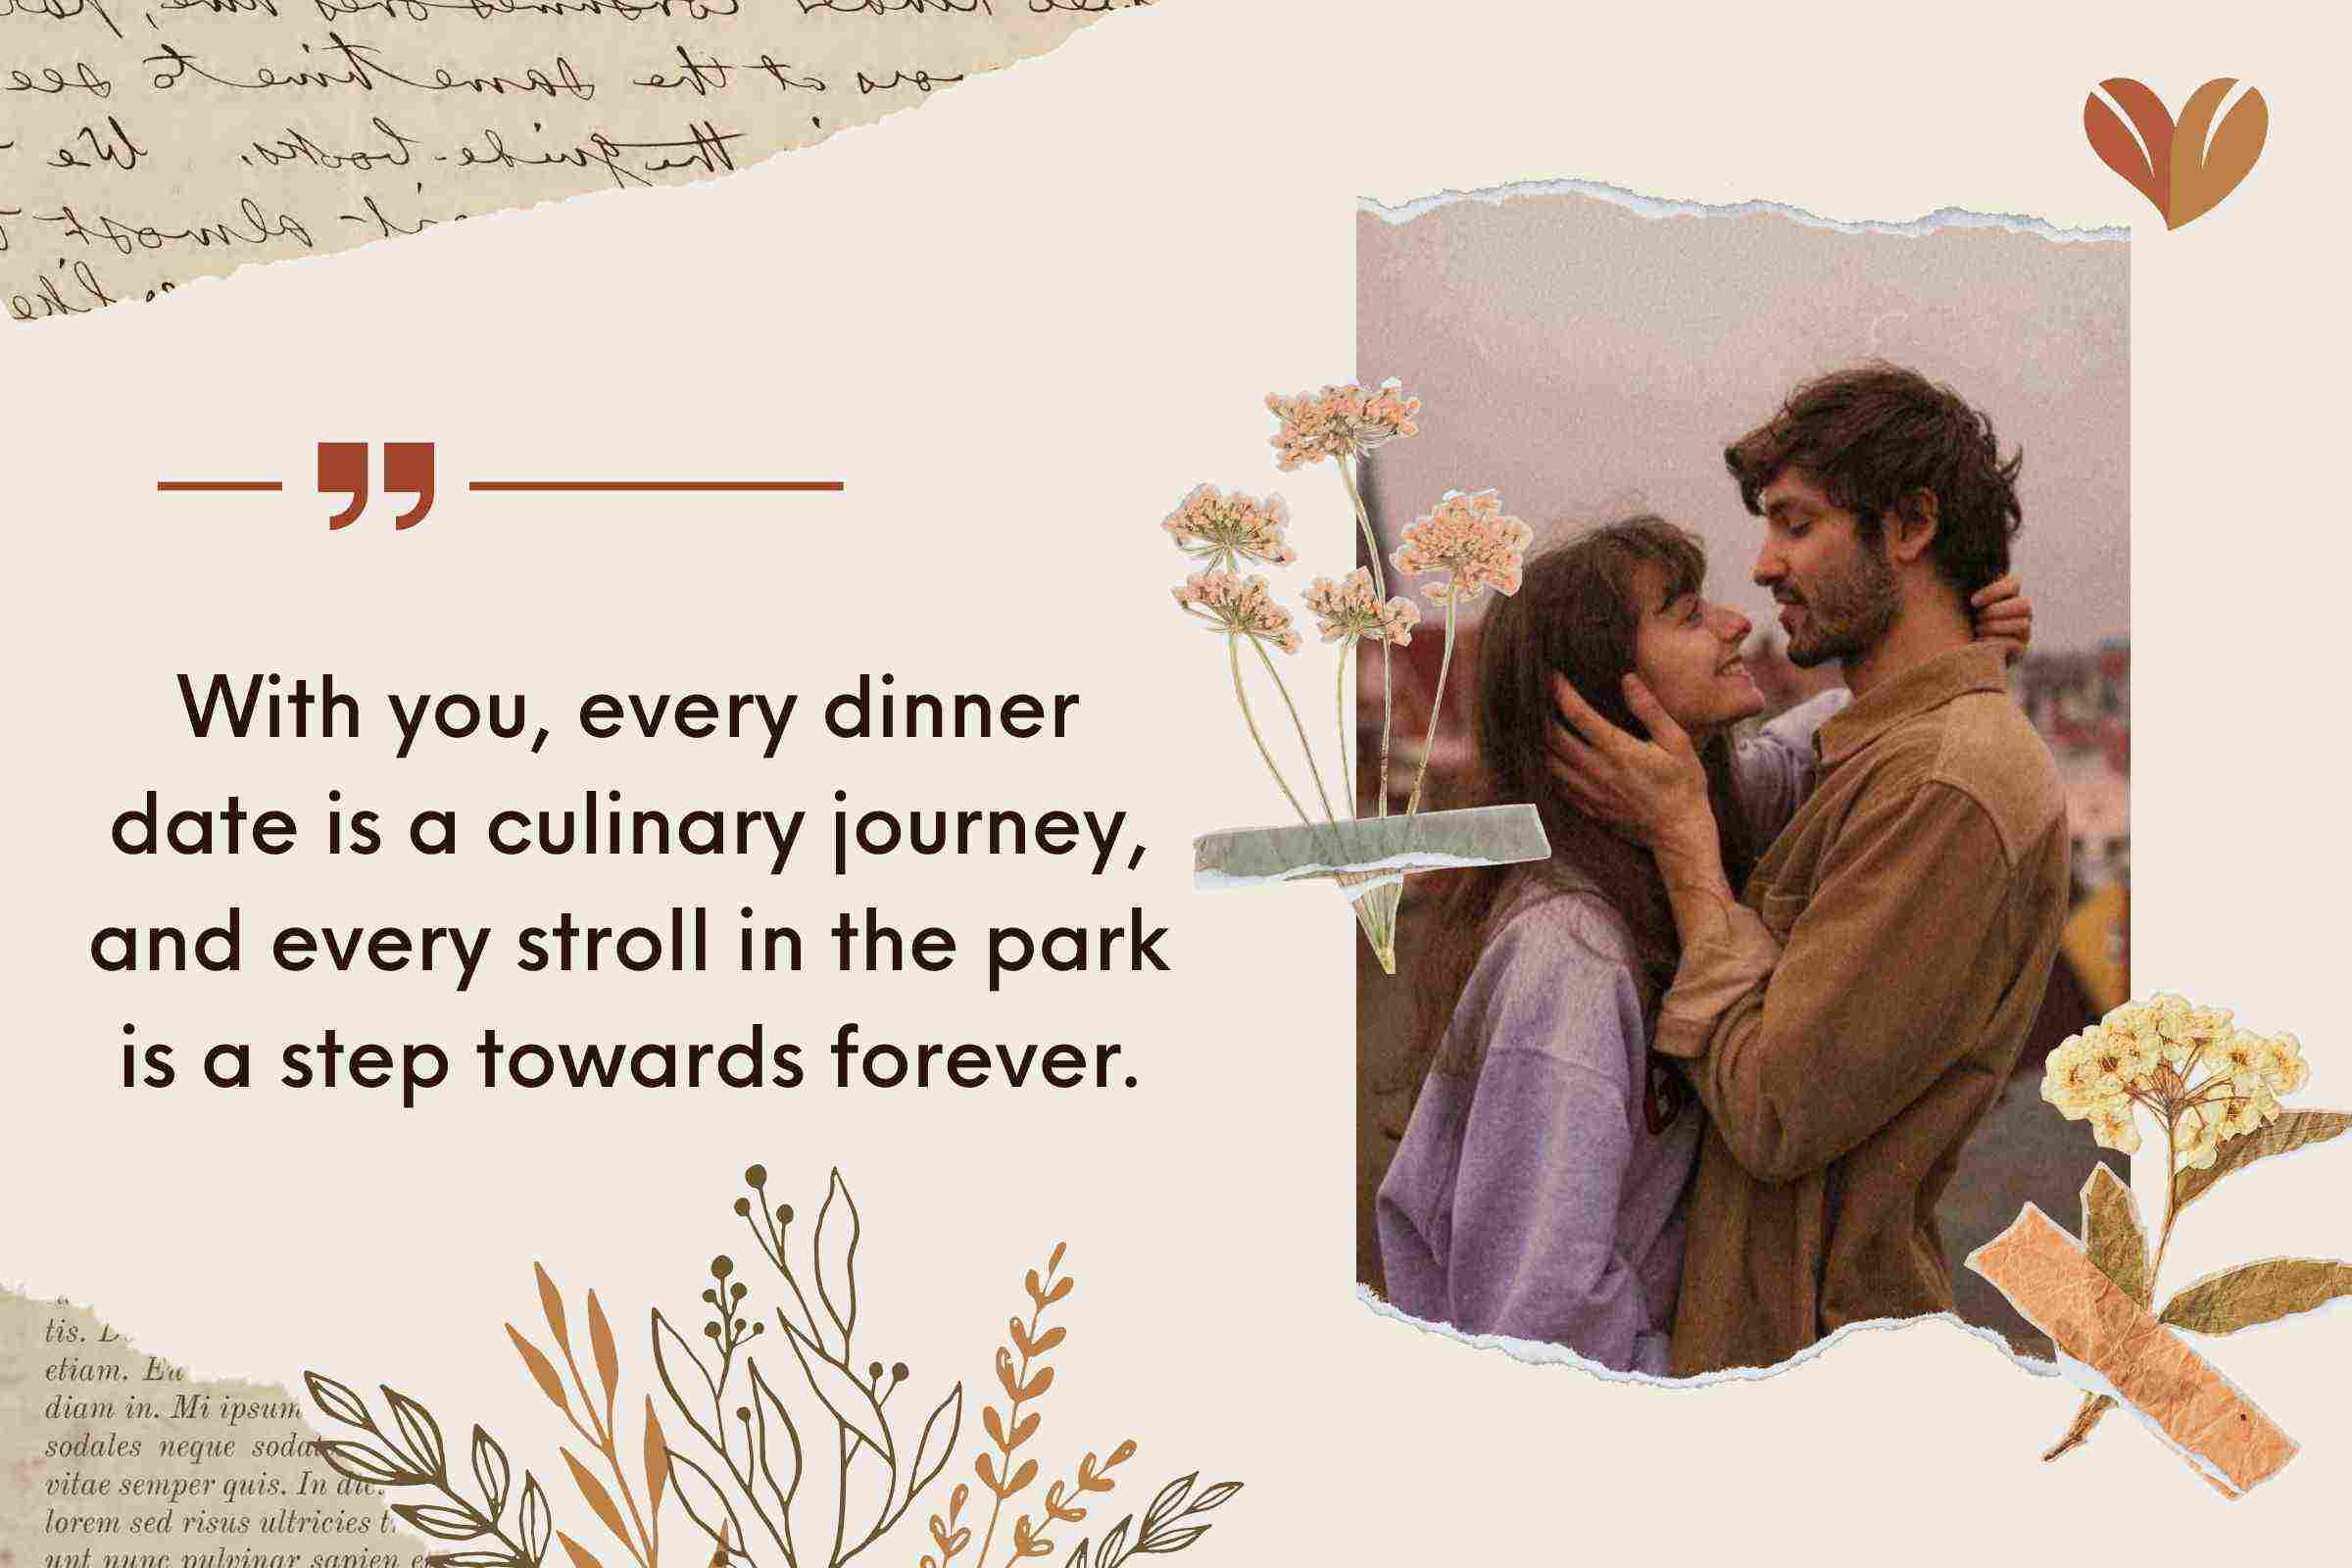 With you, every dinner date is a culinary journey, and every stroll in the park is a step towards forever.